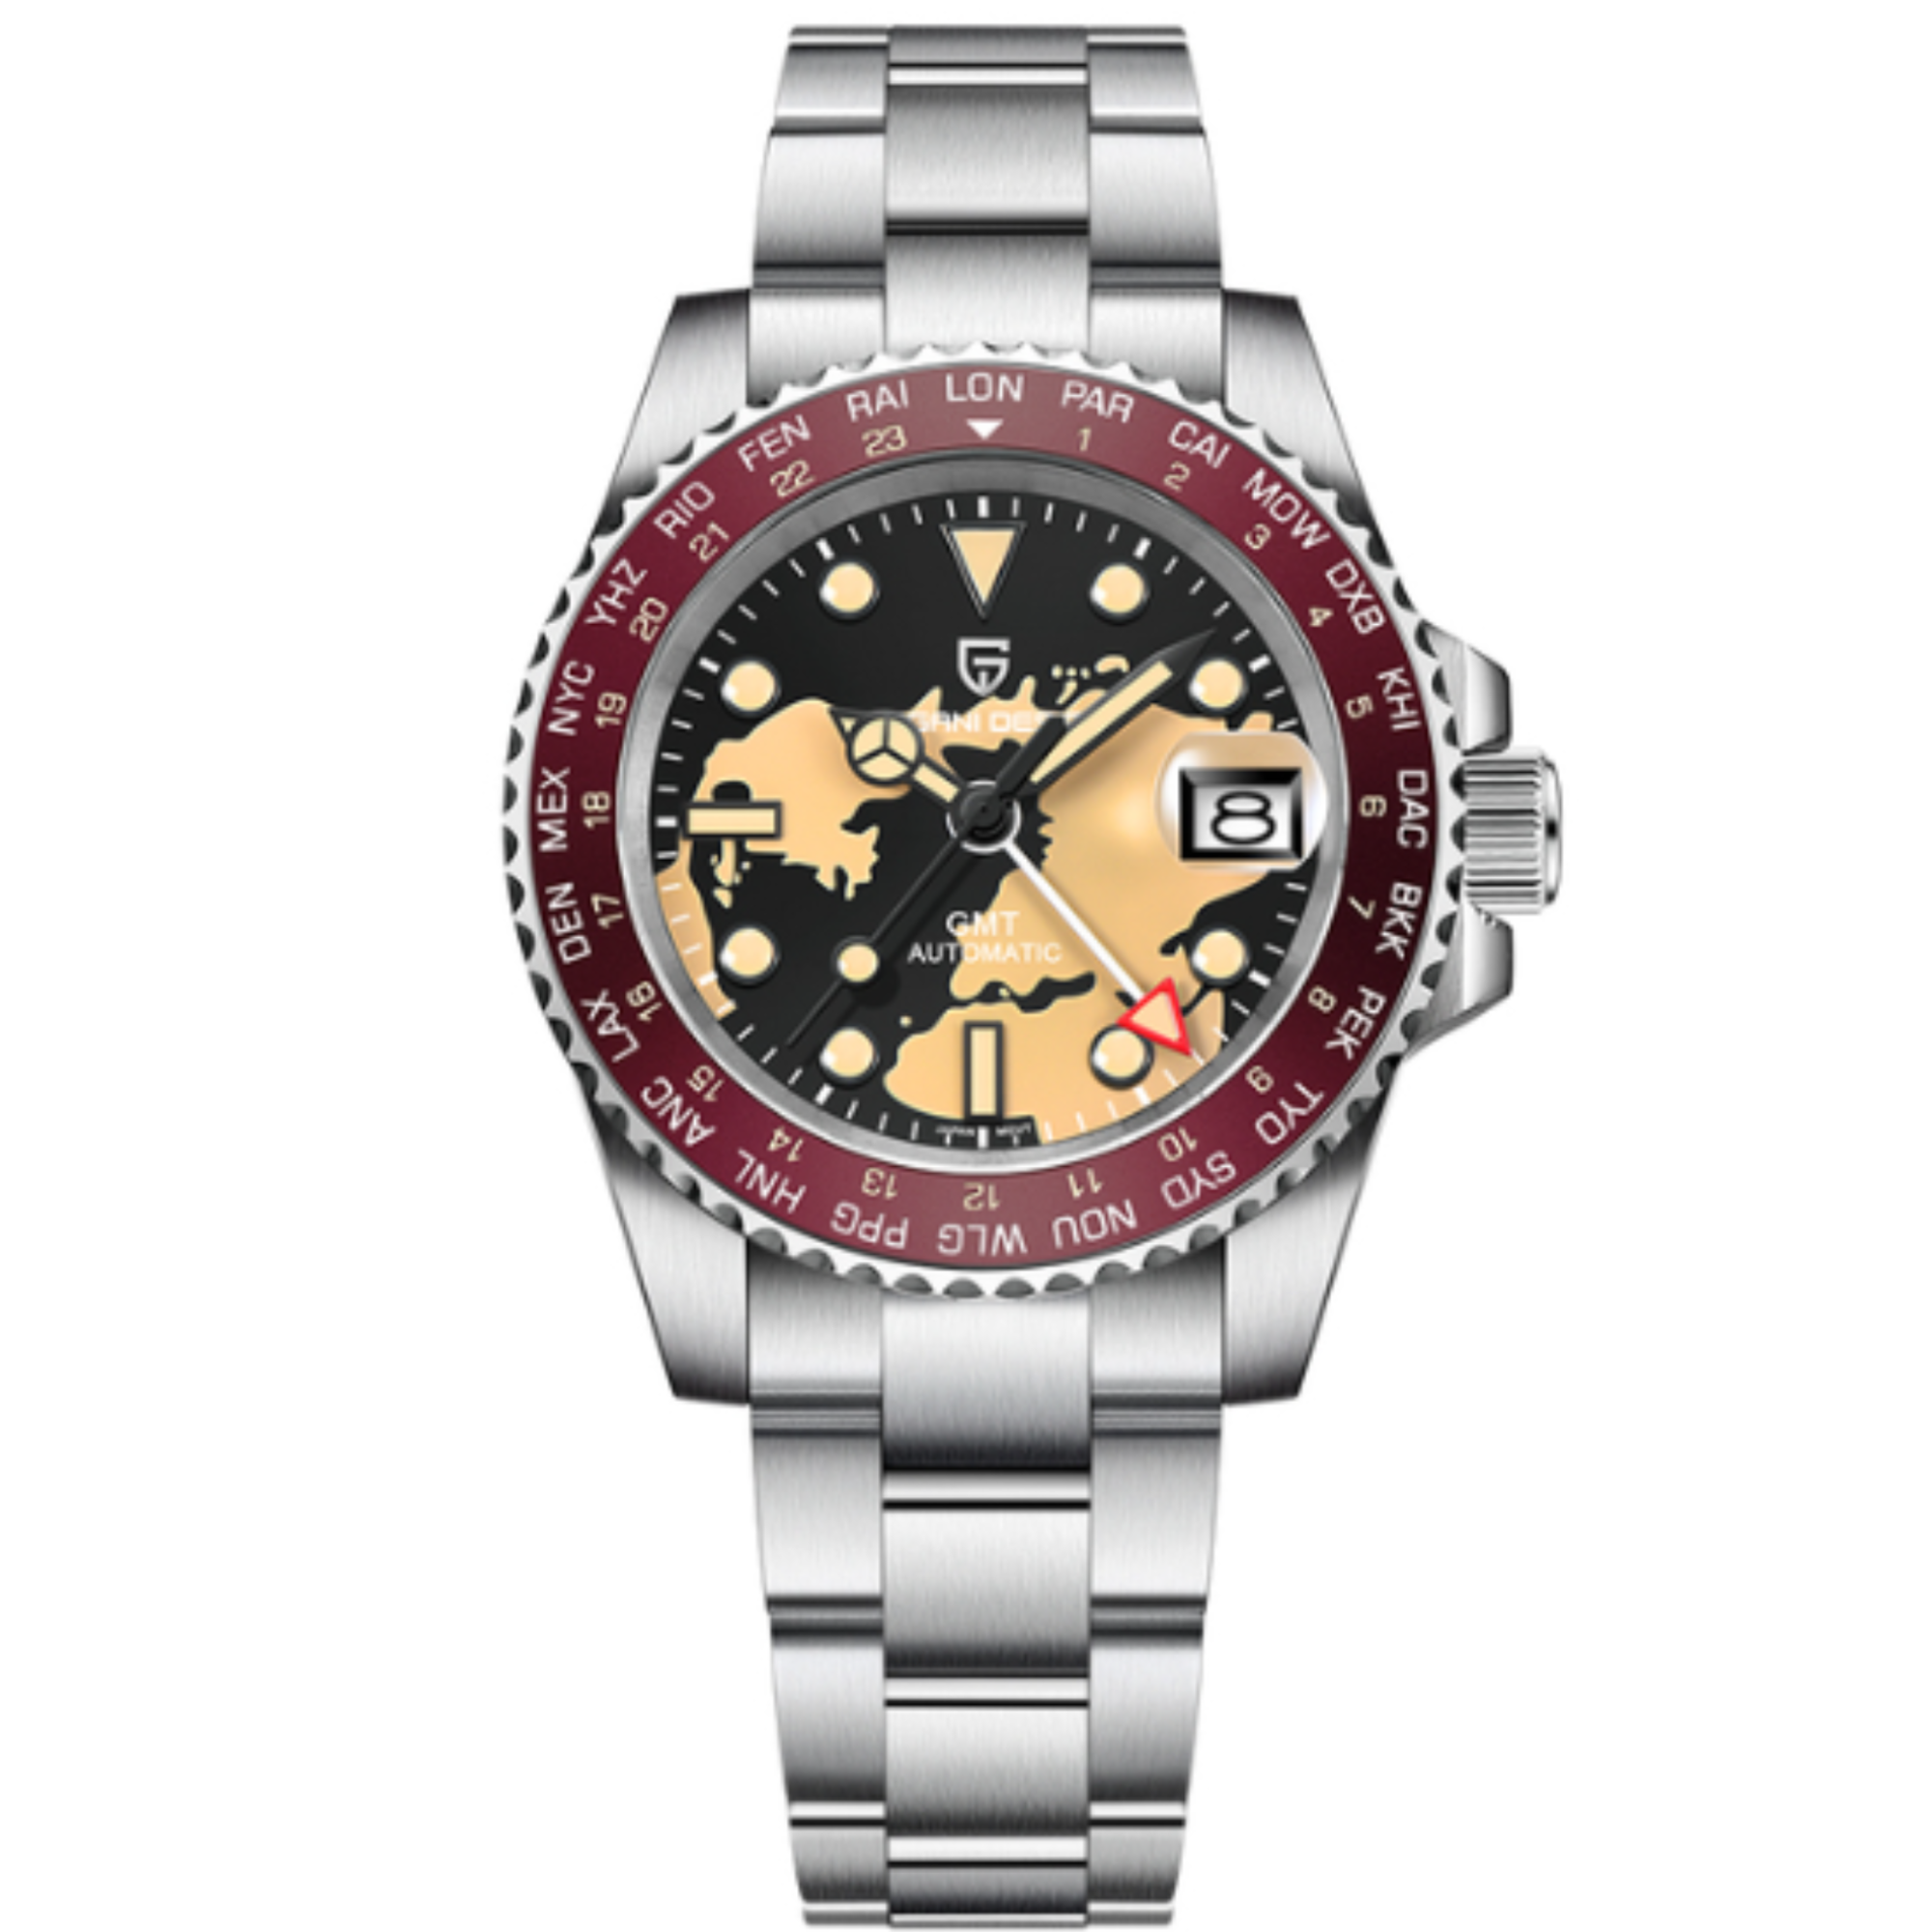 Pagani Design PD-1758 Seiko NH34 Movement equipped with AR AF Anti-Radiation Coating Automatic Watch Stainless Steel Men's ( Maroon Map - Oyster Bracelet)